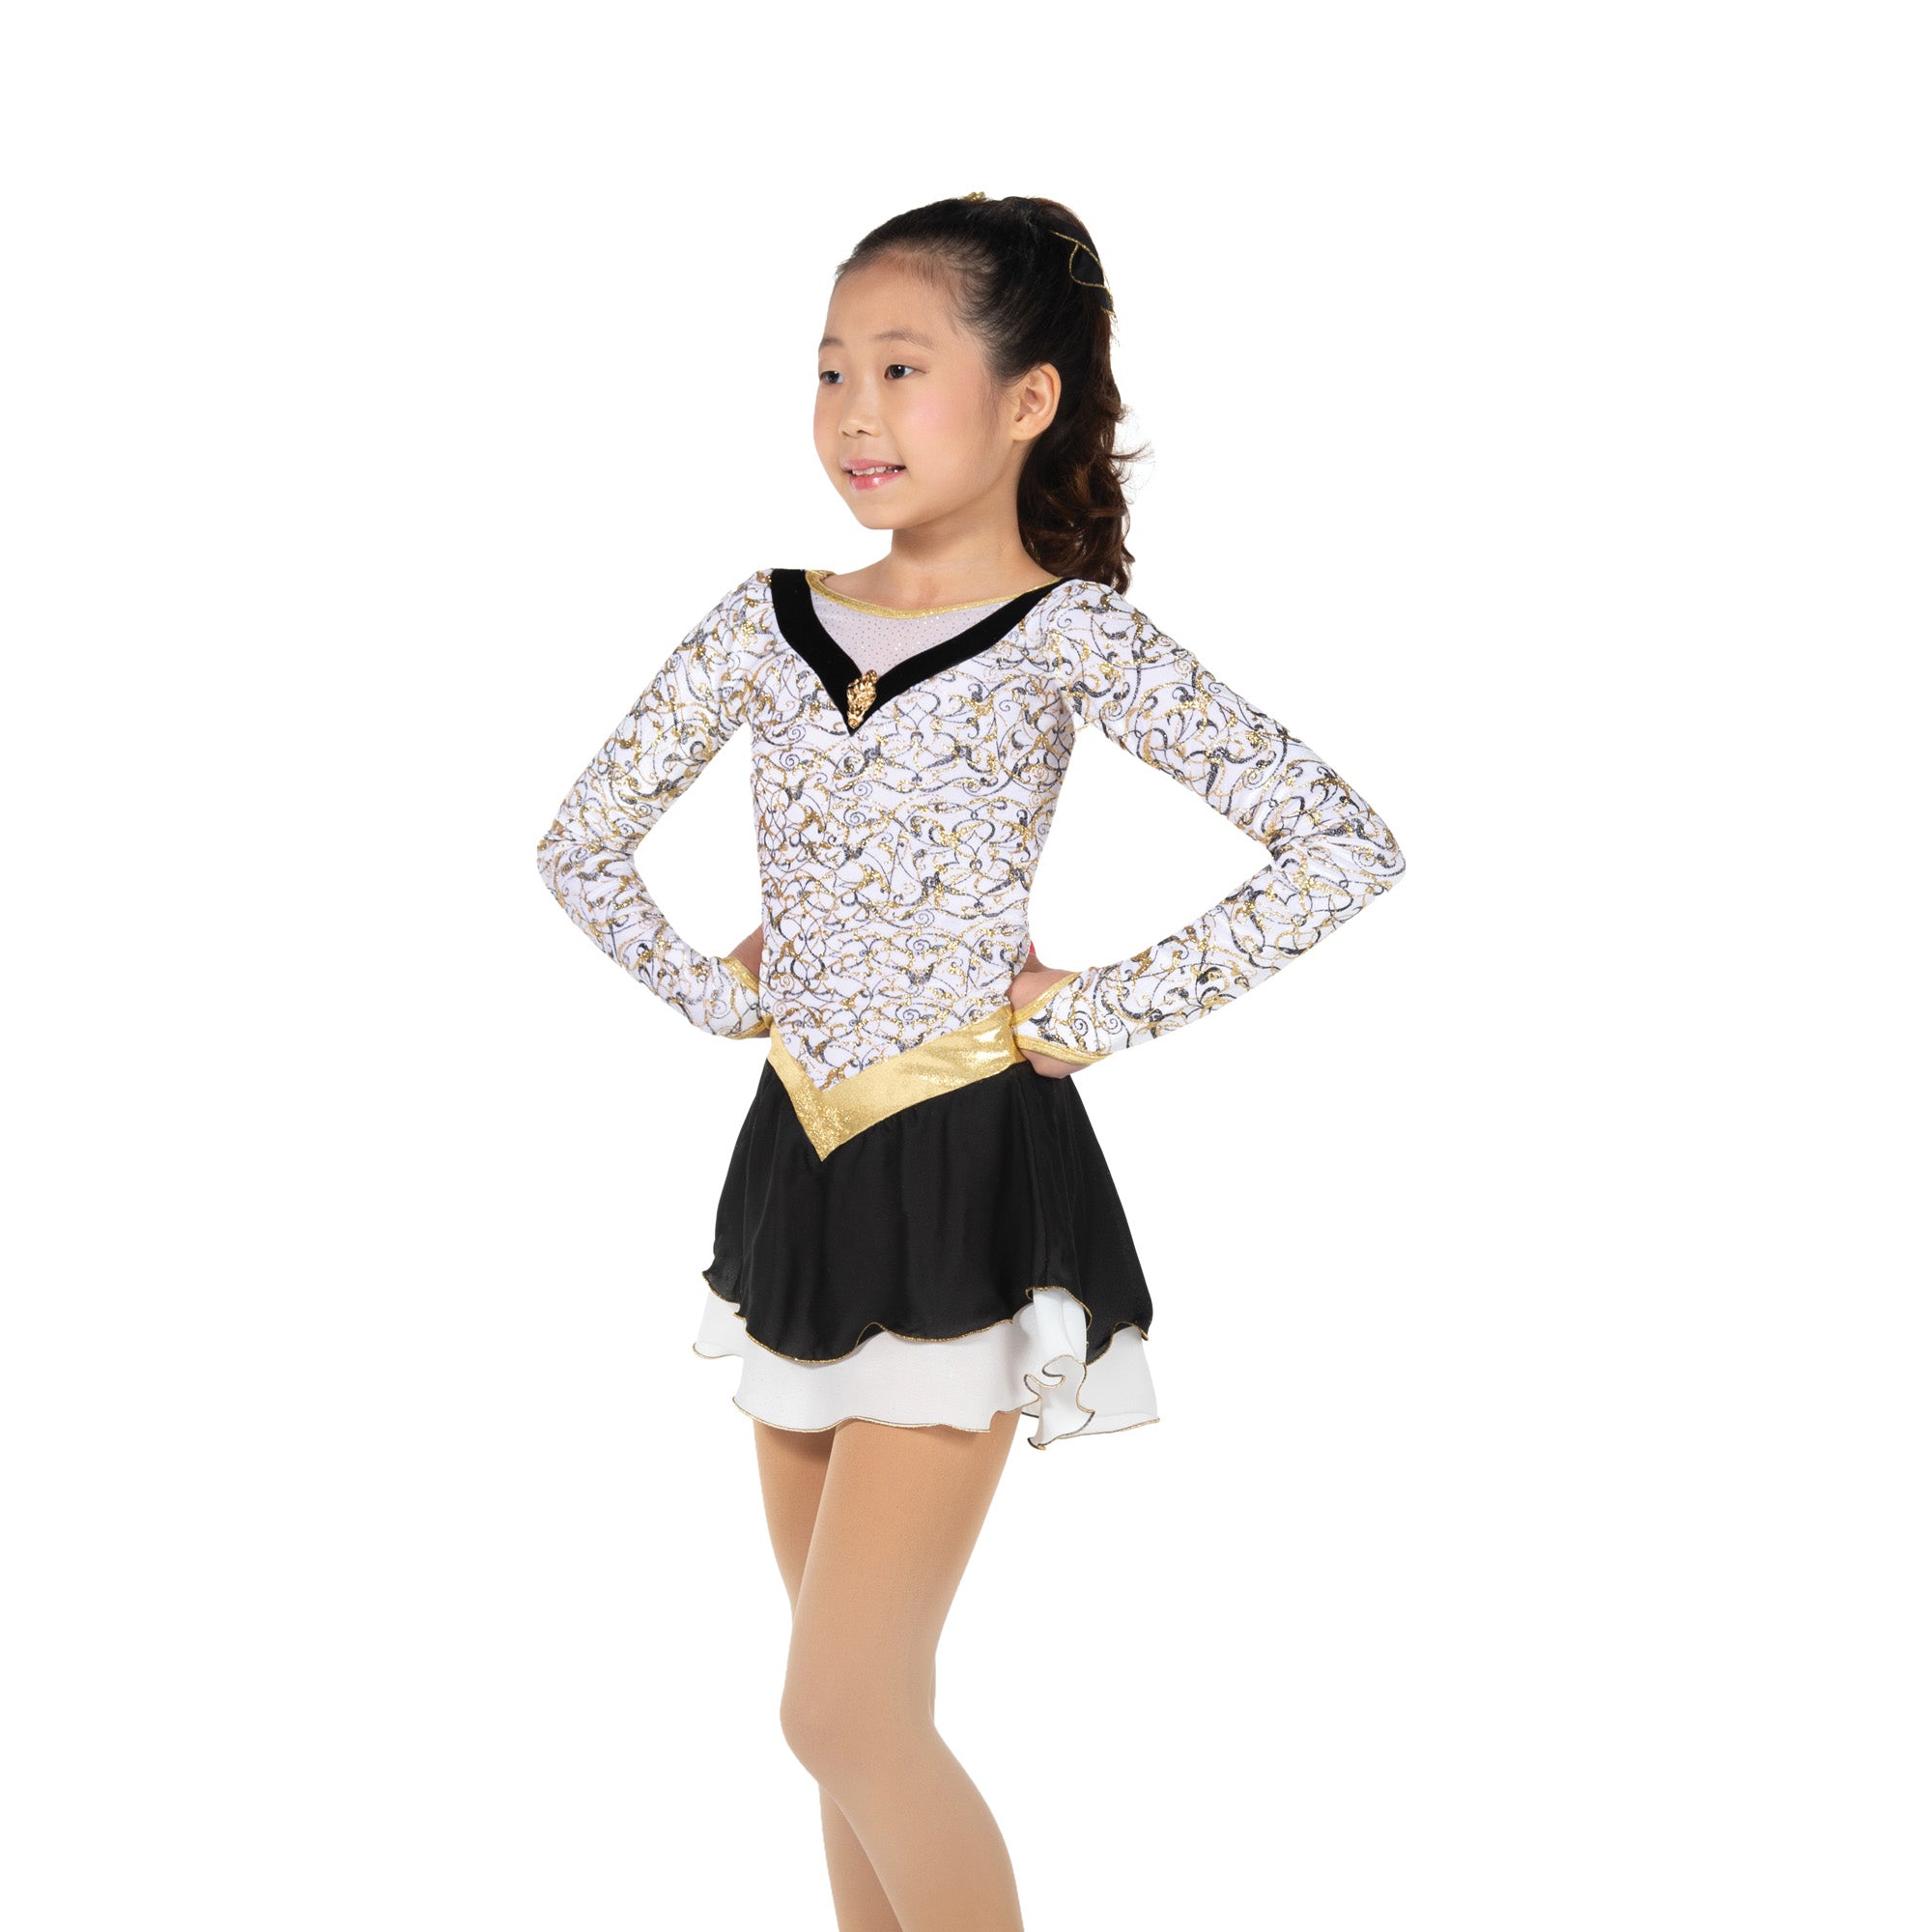 127 Gold & Glamour Skating Dress by Jerry's